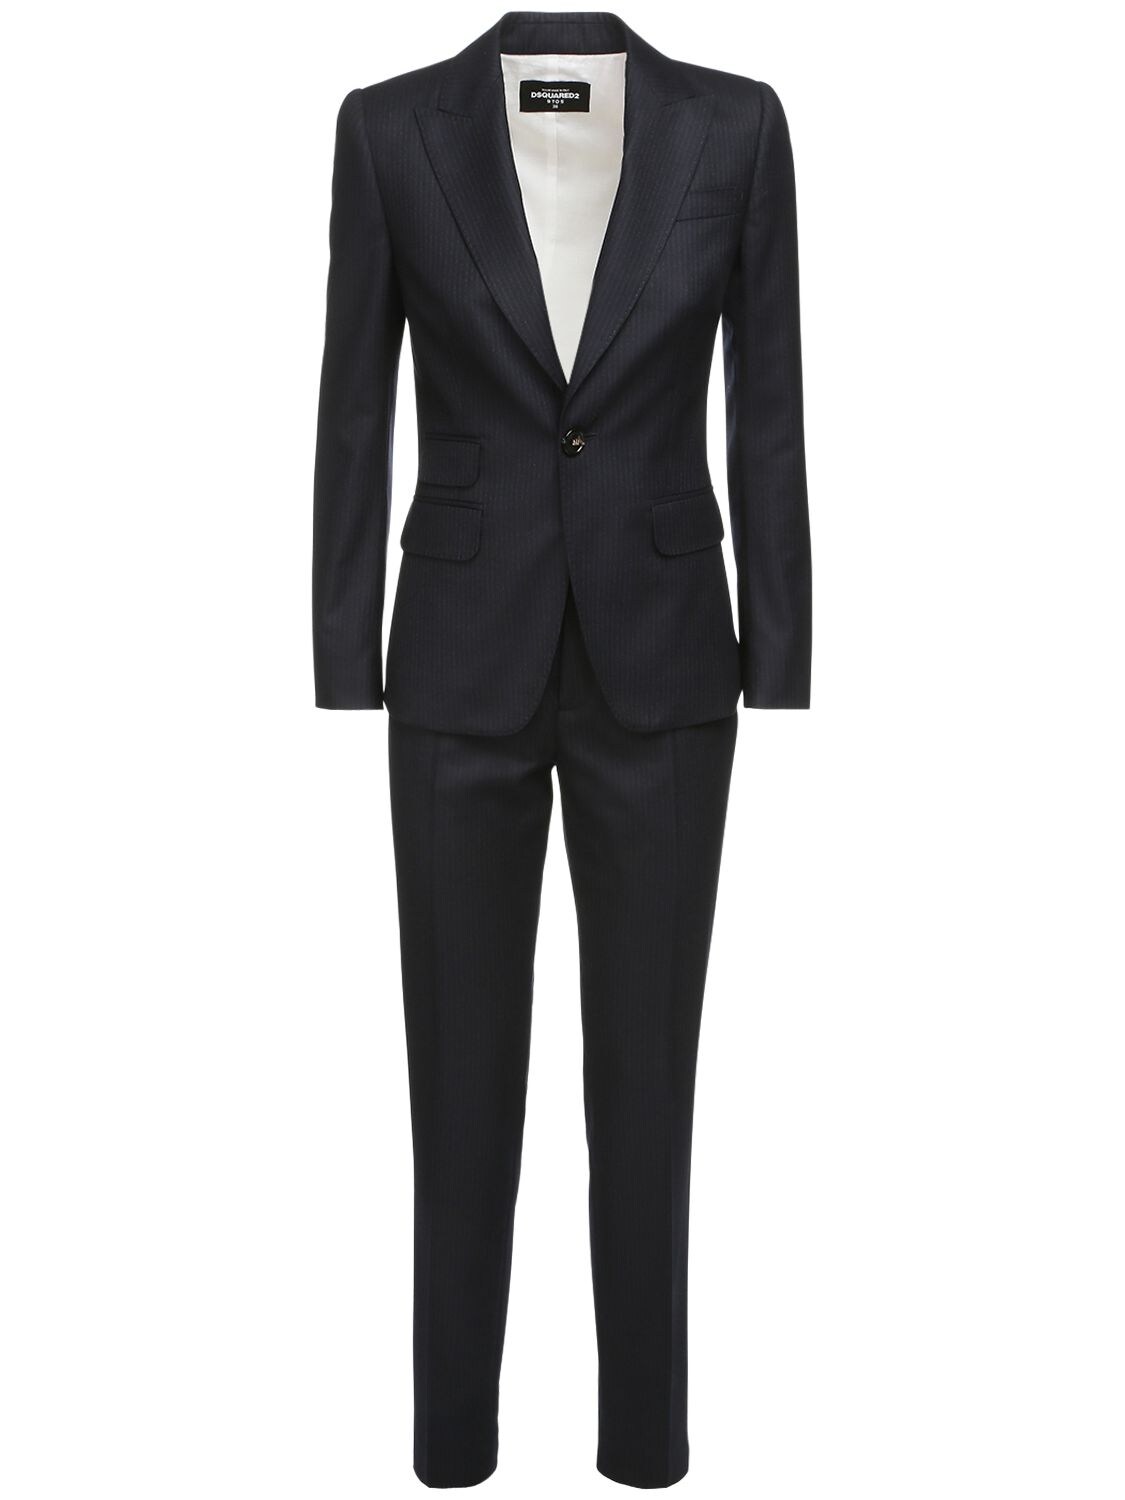 DSQUARED2 STRIPED WOOL SINGLE BREAST SUIT,72I07Y016-MDAYRG2